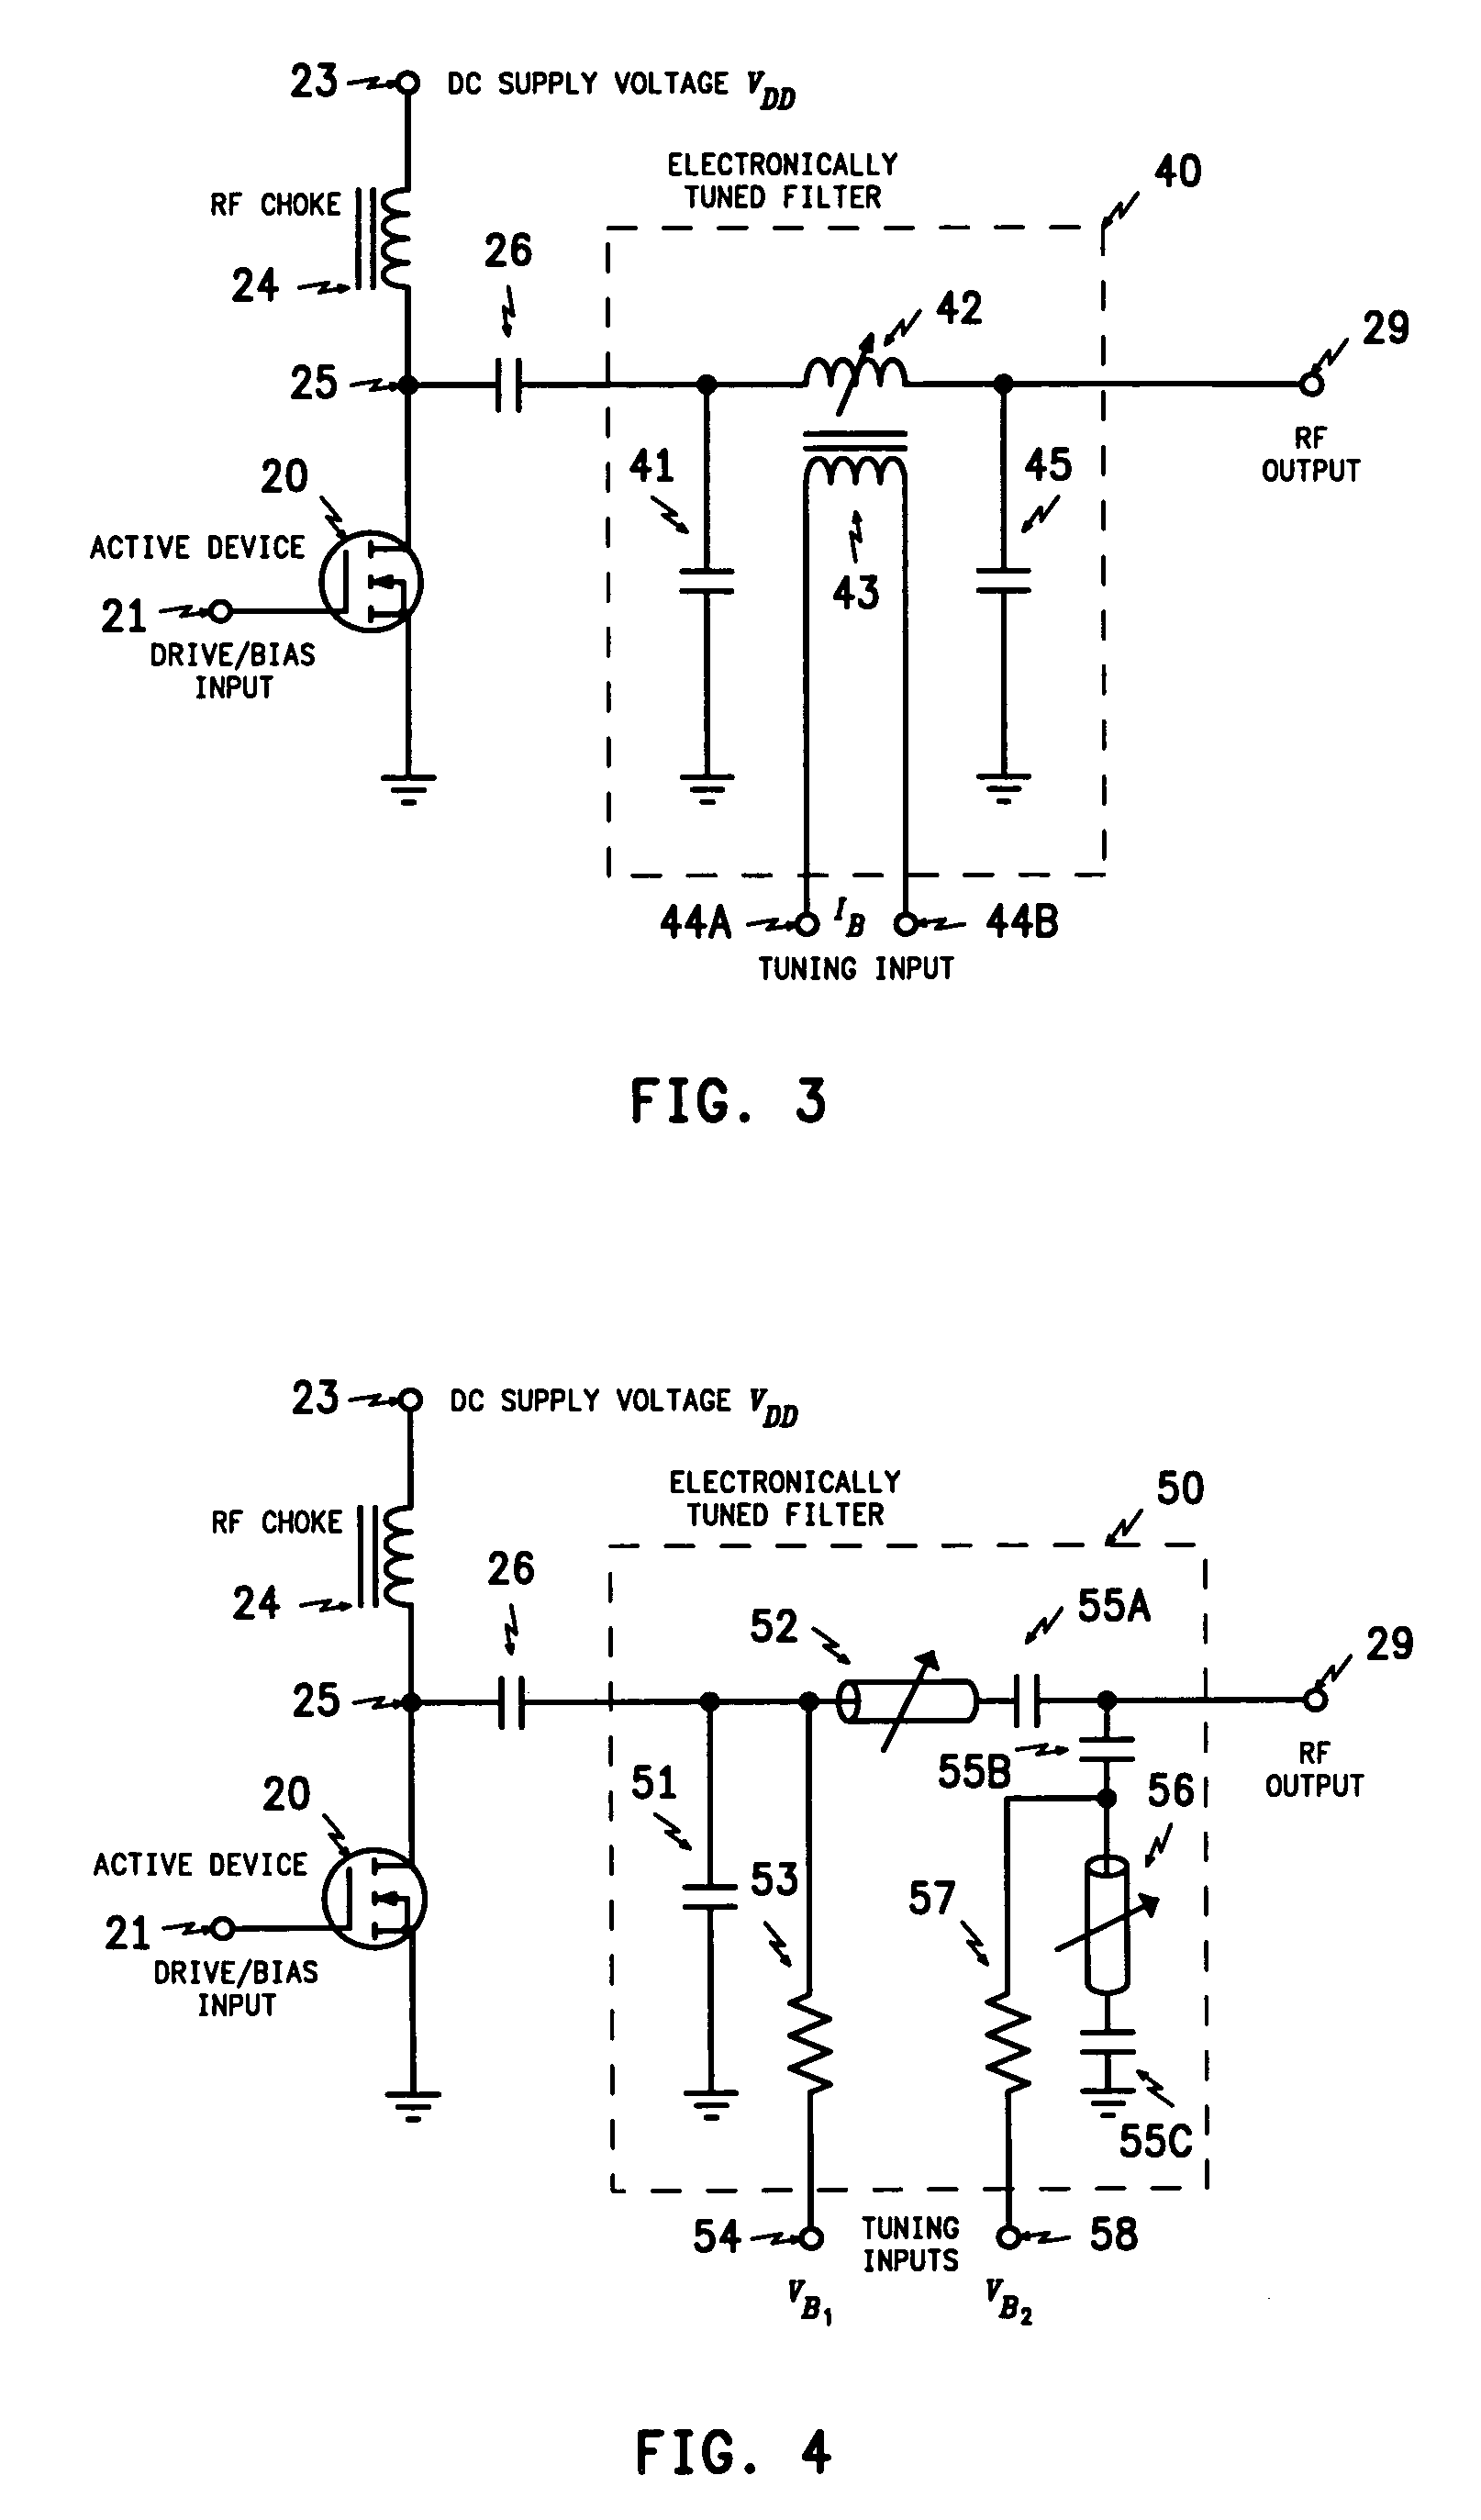 Electronically tuned power amplifier